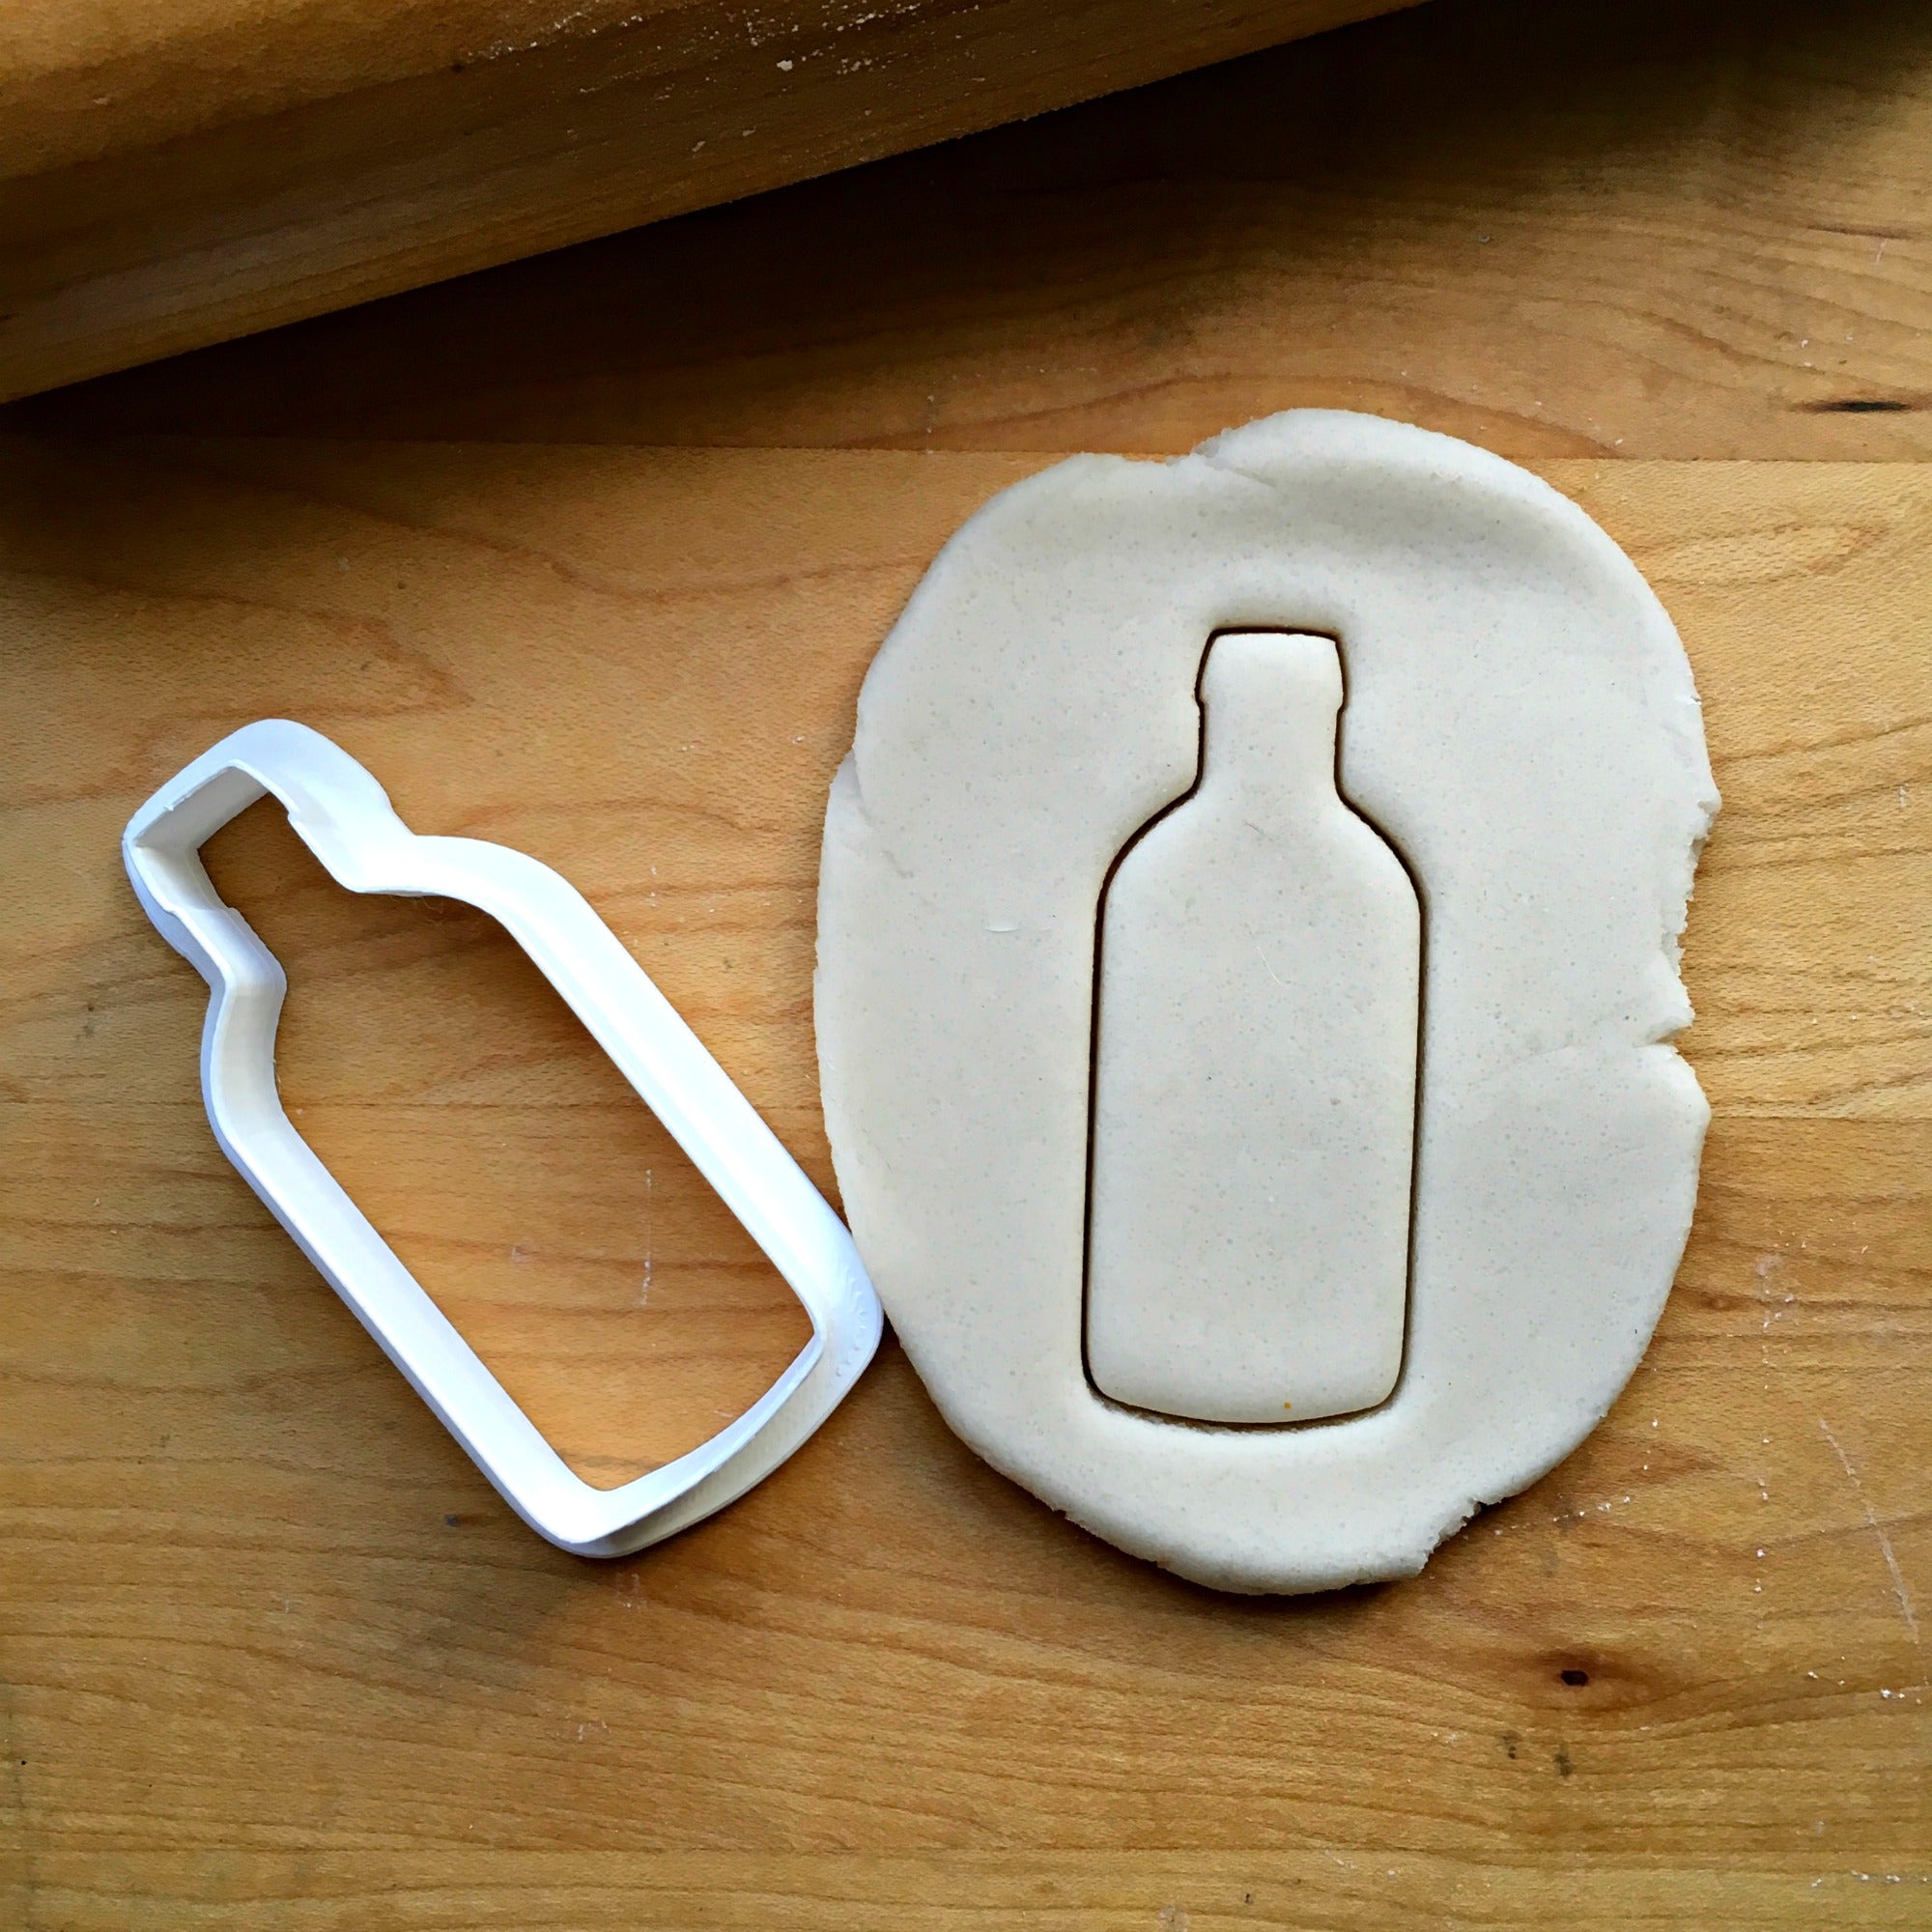 RX Pill Bottle Cookie Cutter/multi-size/dishwasher Safe Available 